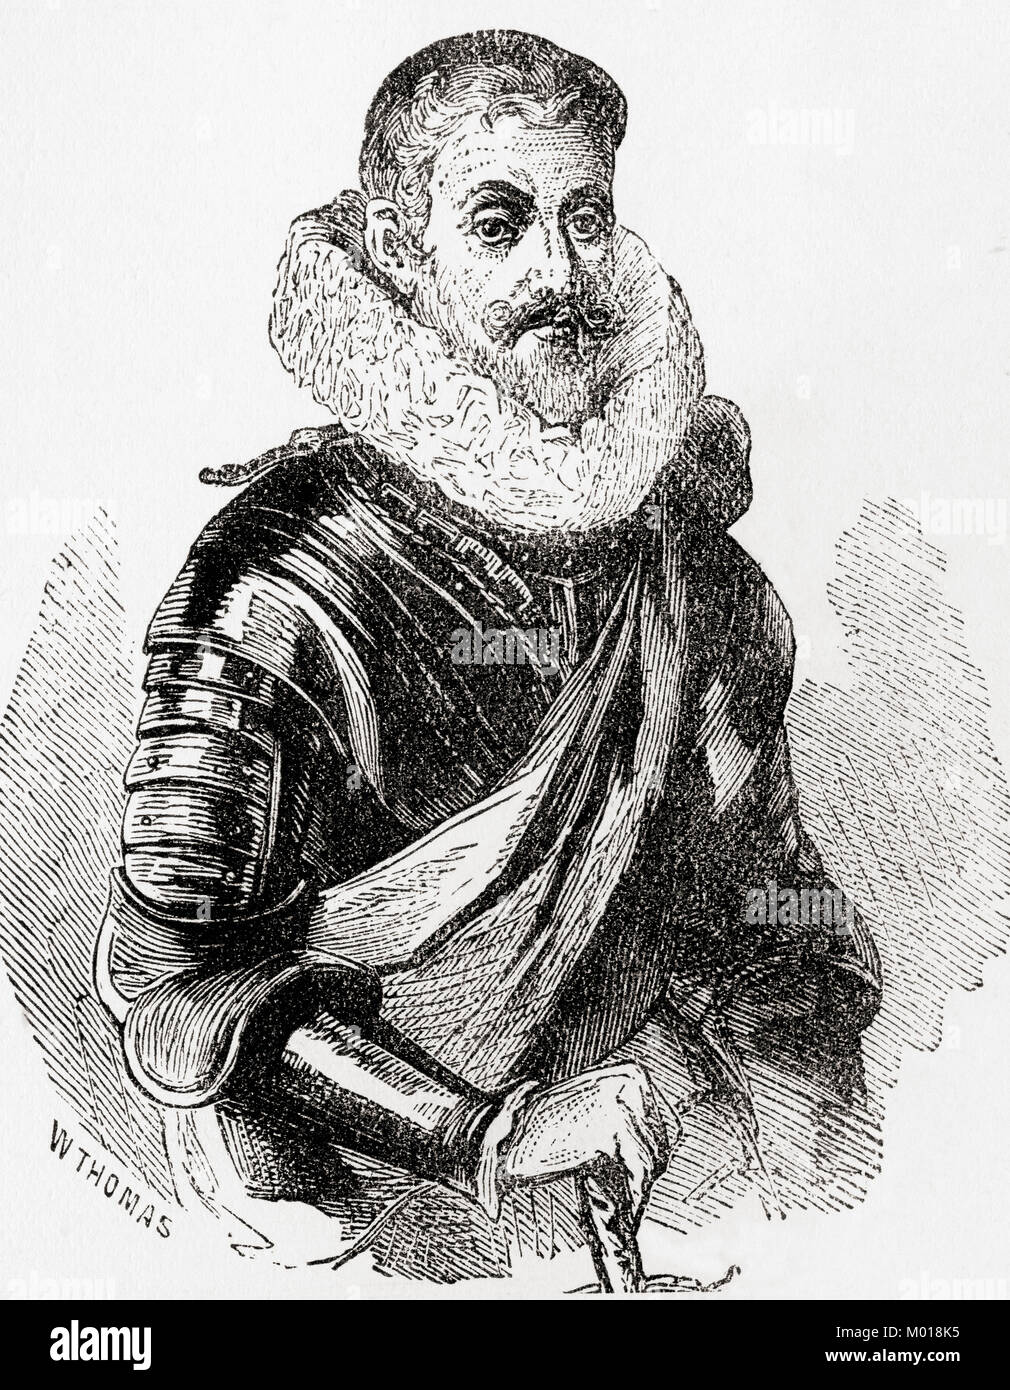 Johann Tserclaes, Count of Tilly, 1559 –1632.  Field marshal, commander of the Catholic League's forces in the Thirty Years' War.  From Ward and Lock's Illustrated History of the World, published c.1882. Stock Photo